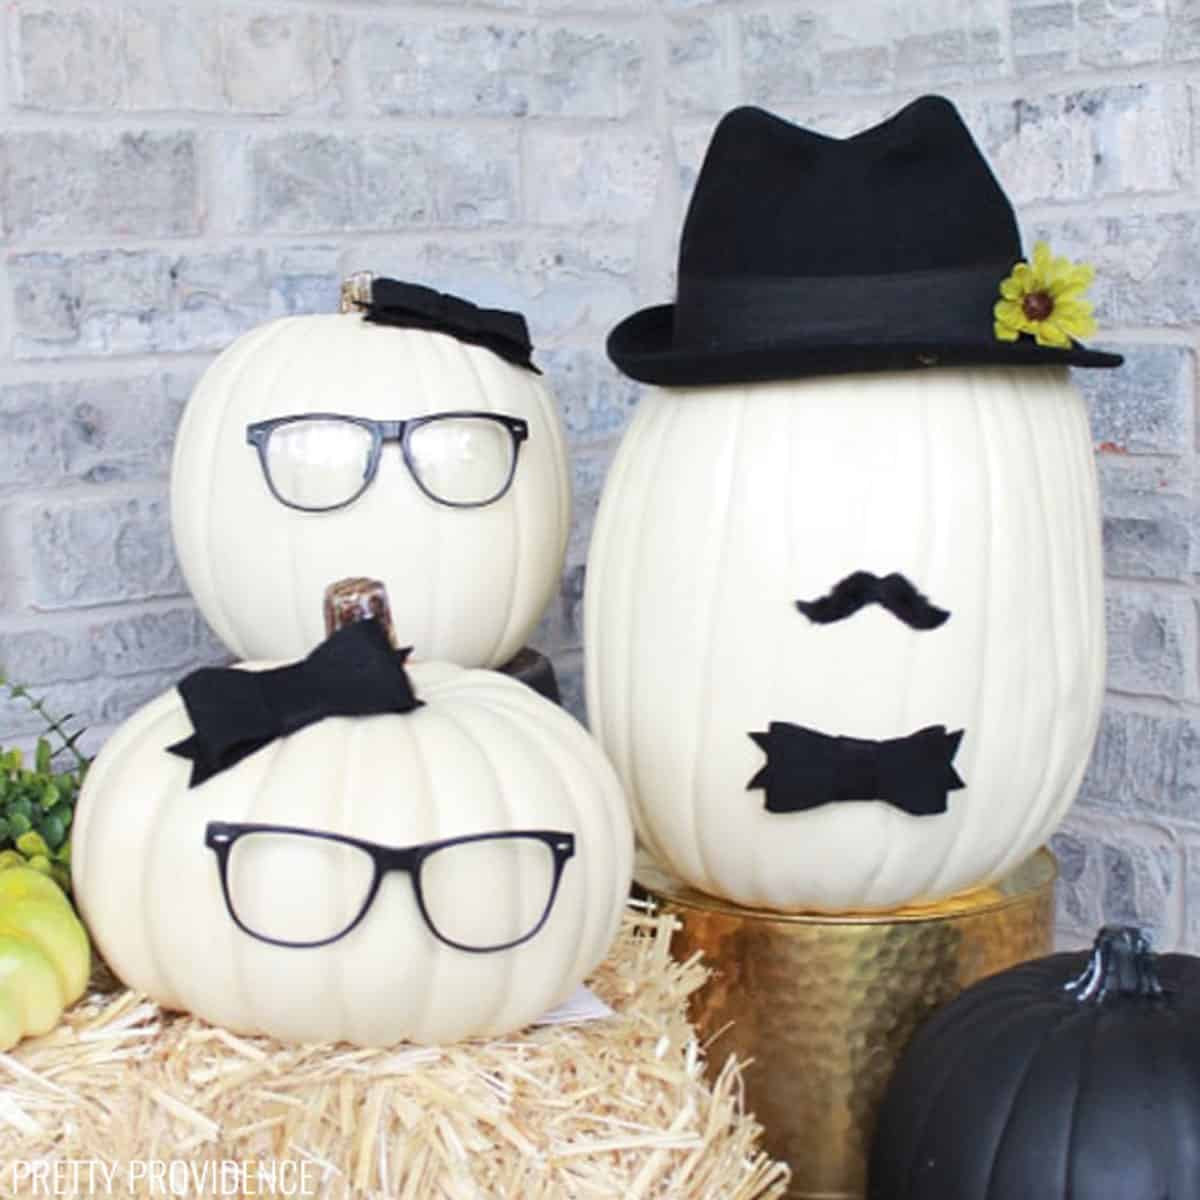 Three cream-colored pumpkins. Two pumpkins have black eyeglasses and bows glued on, and one has a top hat, a mustache and bow tie glued on.